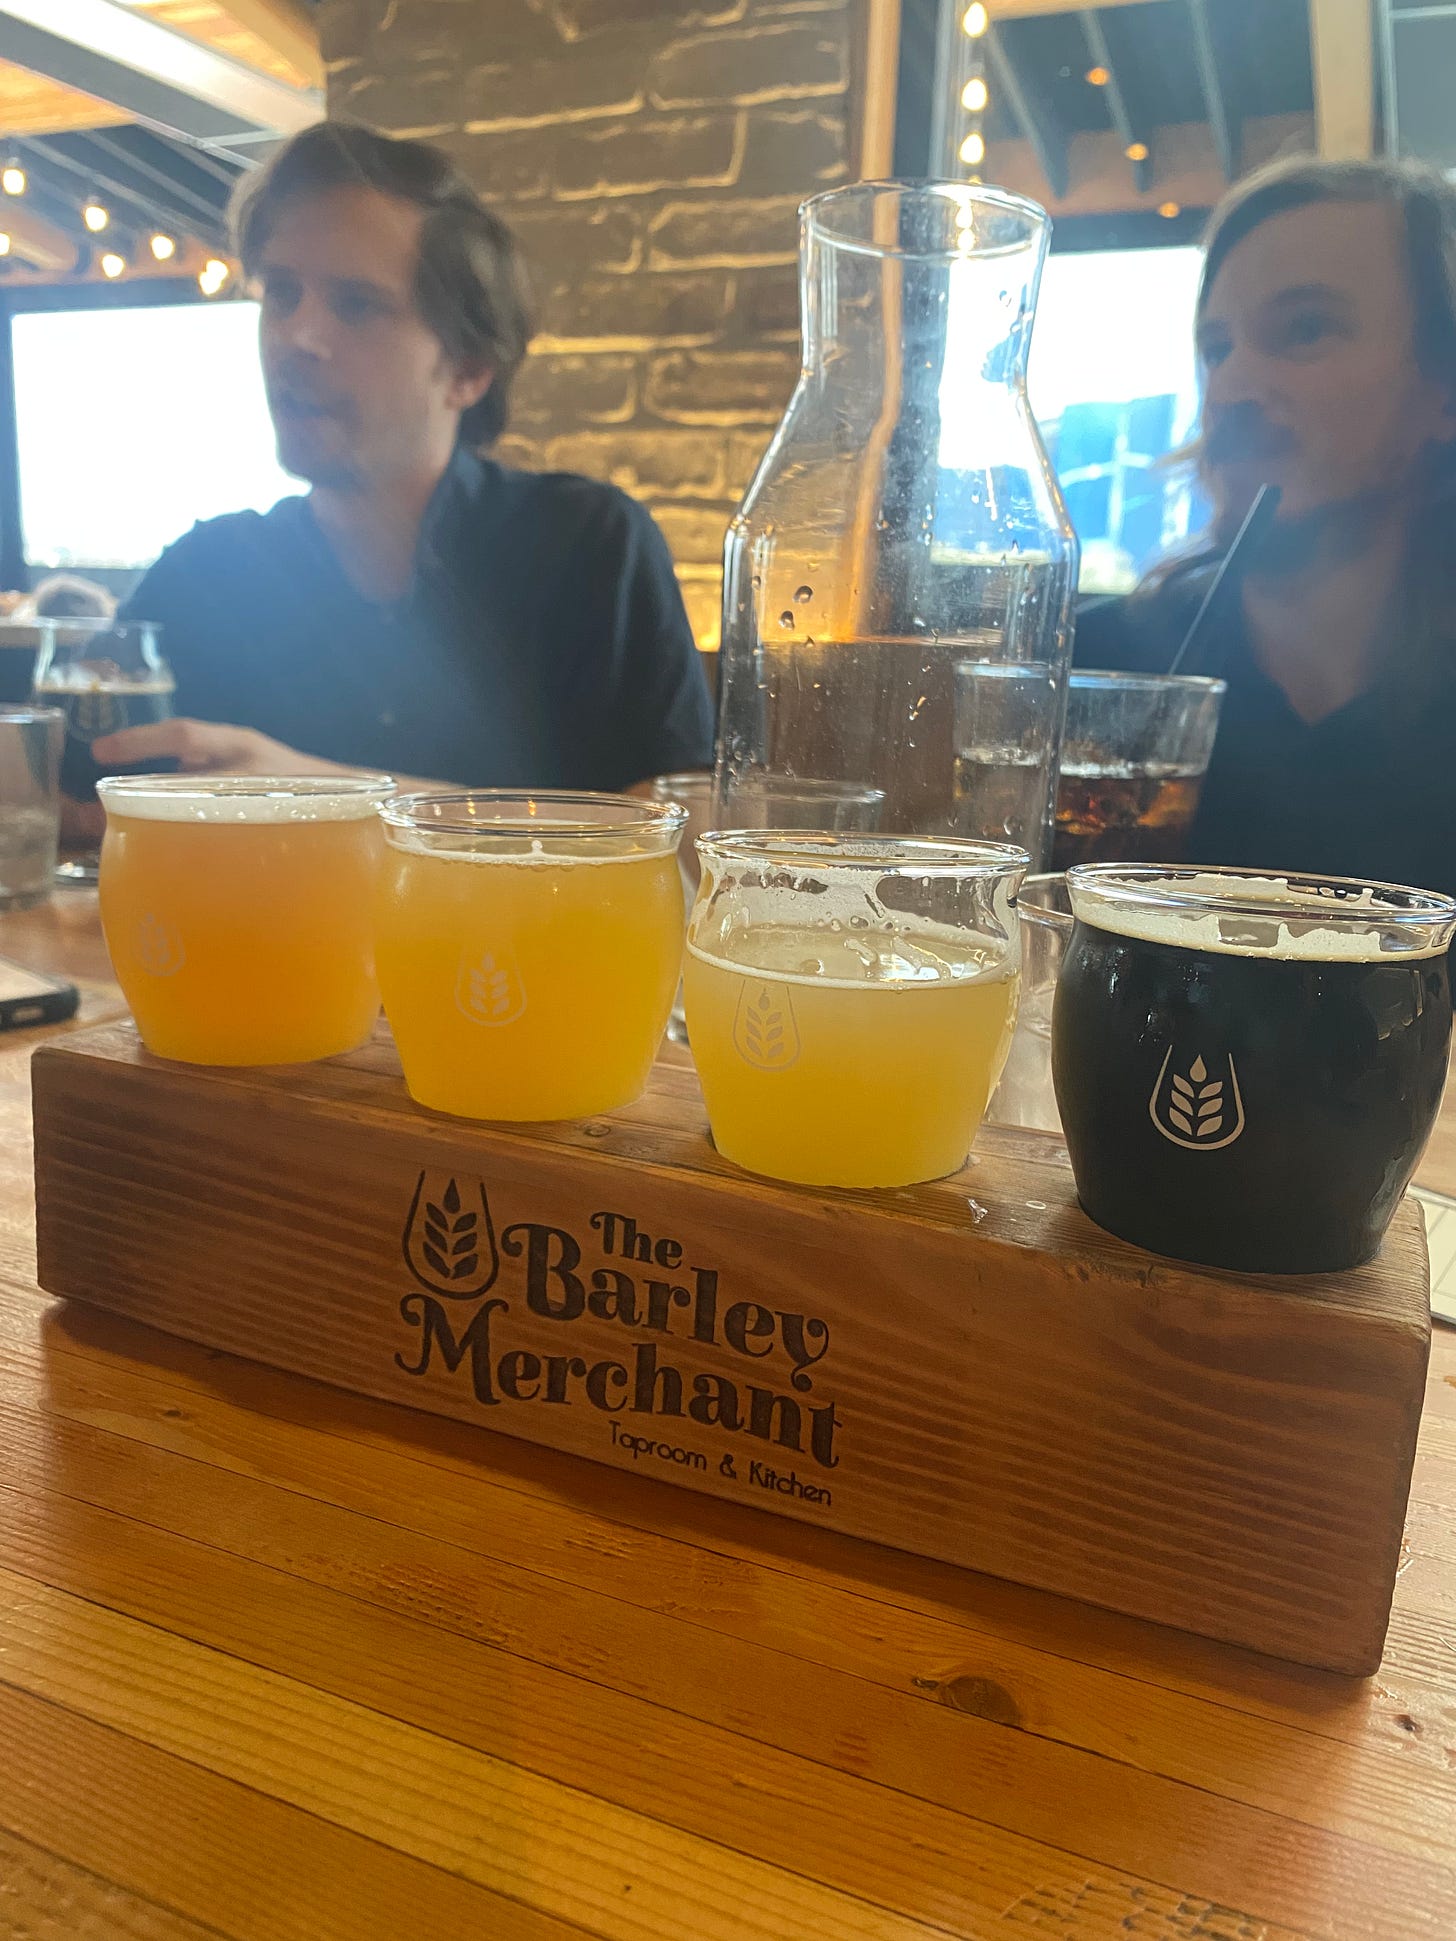 A flight of beer in a wooden block etched with the Barley Merchant's name and logo, a tulip glass with the shape of a sheaf of barley inside.  Most of the beers are light and hazy in colour, with a dark stout at the end. In the background across the table are my brothers, sitting in front of a brick wall.